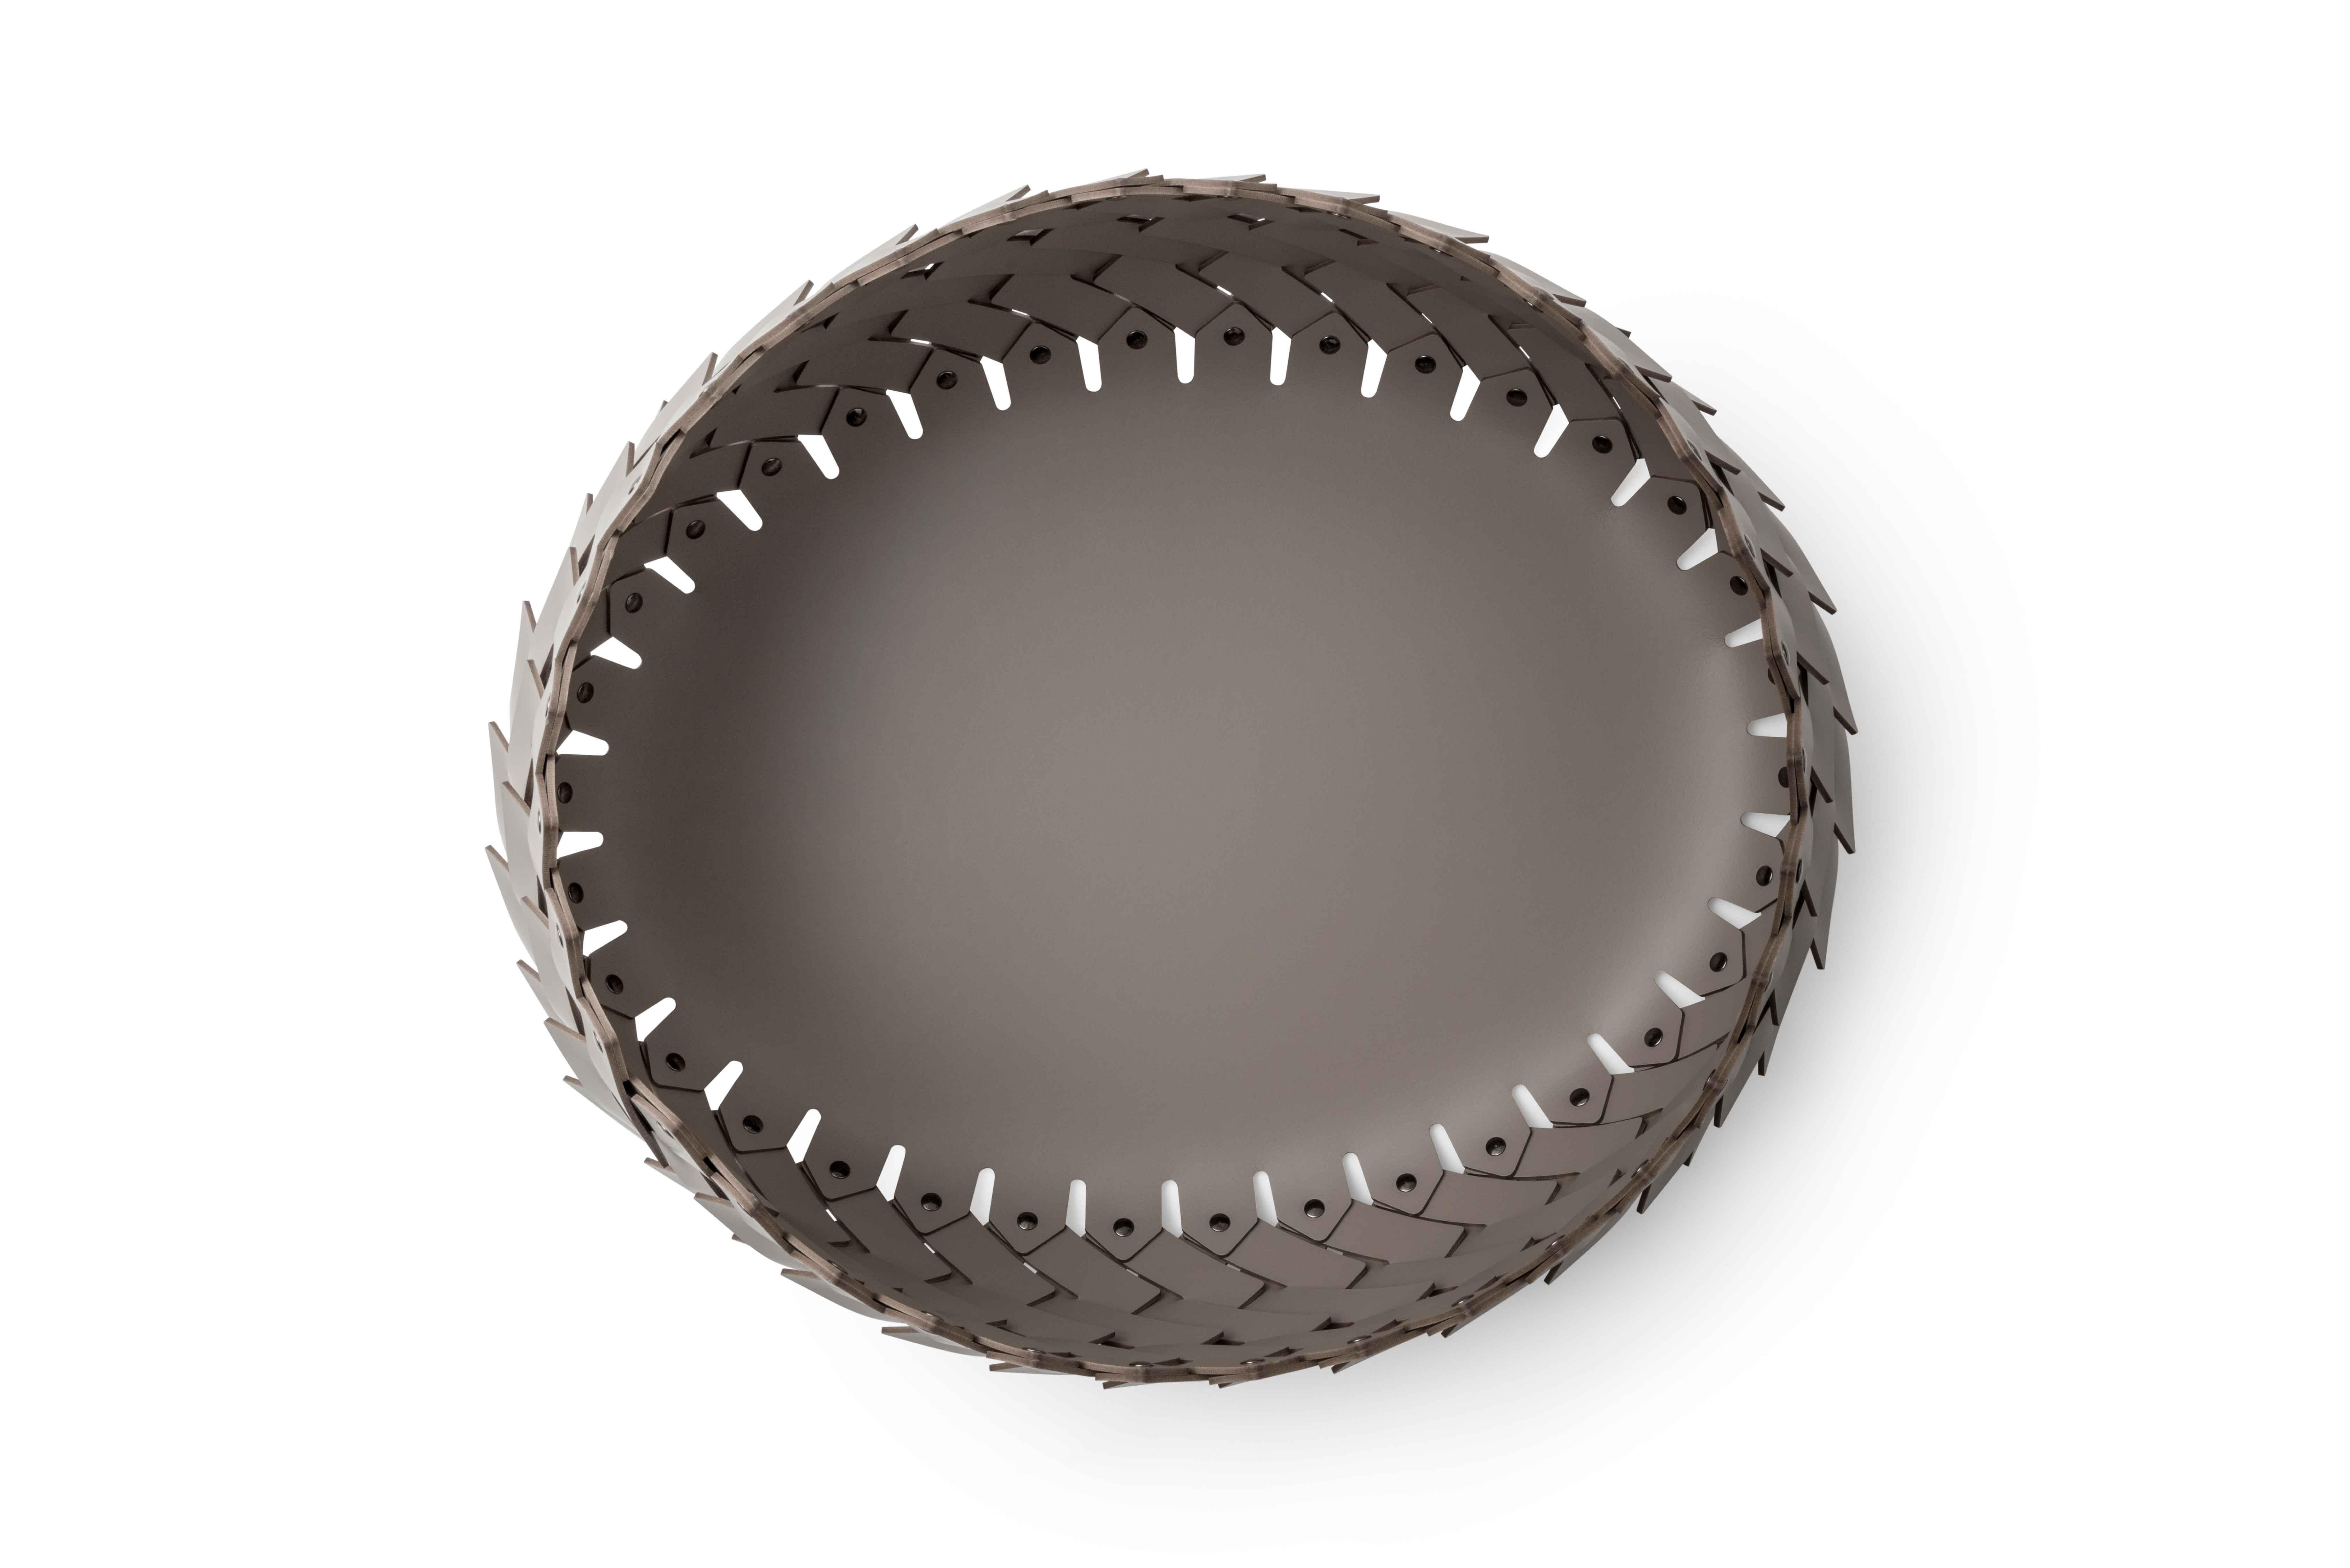 Extremely elegant and versatile, part of the Almeria series.

Made with eco-friendly, washable and resistant regenerated leather this oval basket is perfect as a wood holder, in a living room or as shoes or towel basket holder for yacht, SPAs or